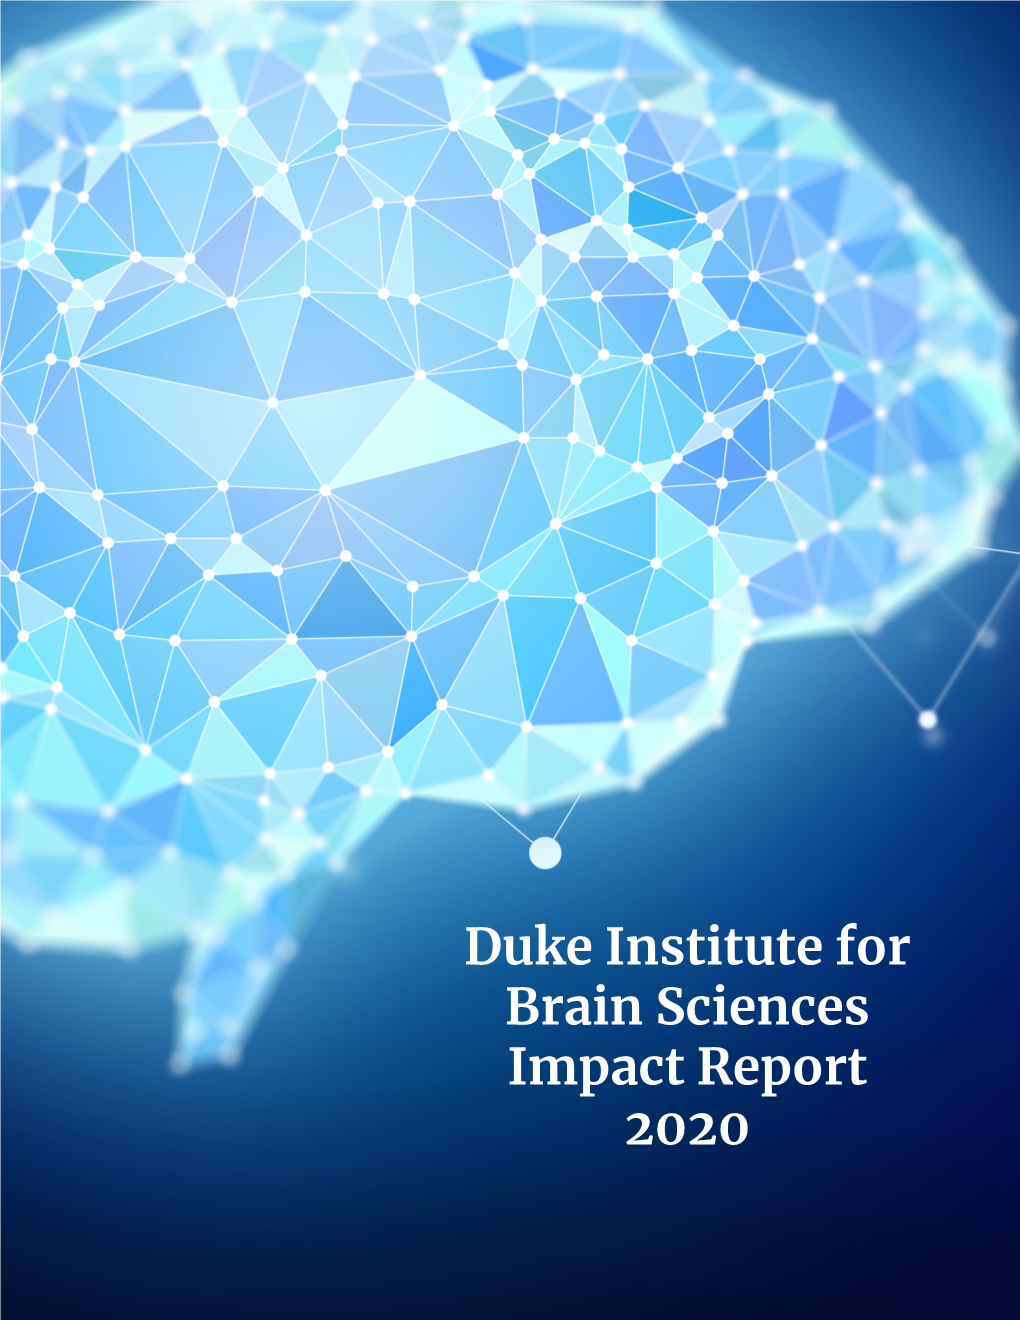 Duke Institute for Brain Sciences Impact Report 2020 the YEAR of COVID-19